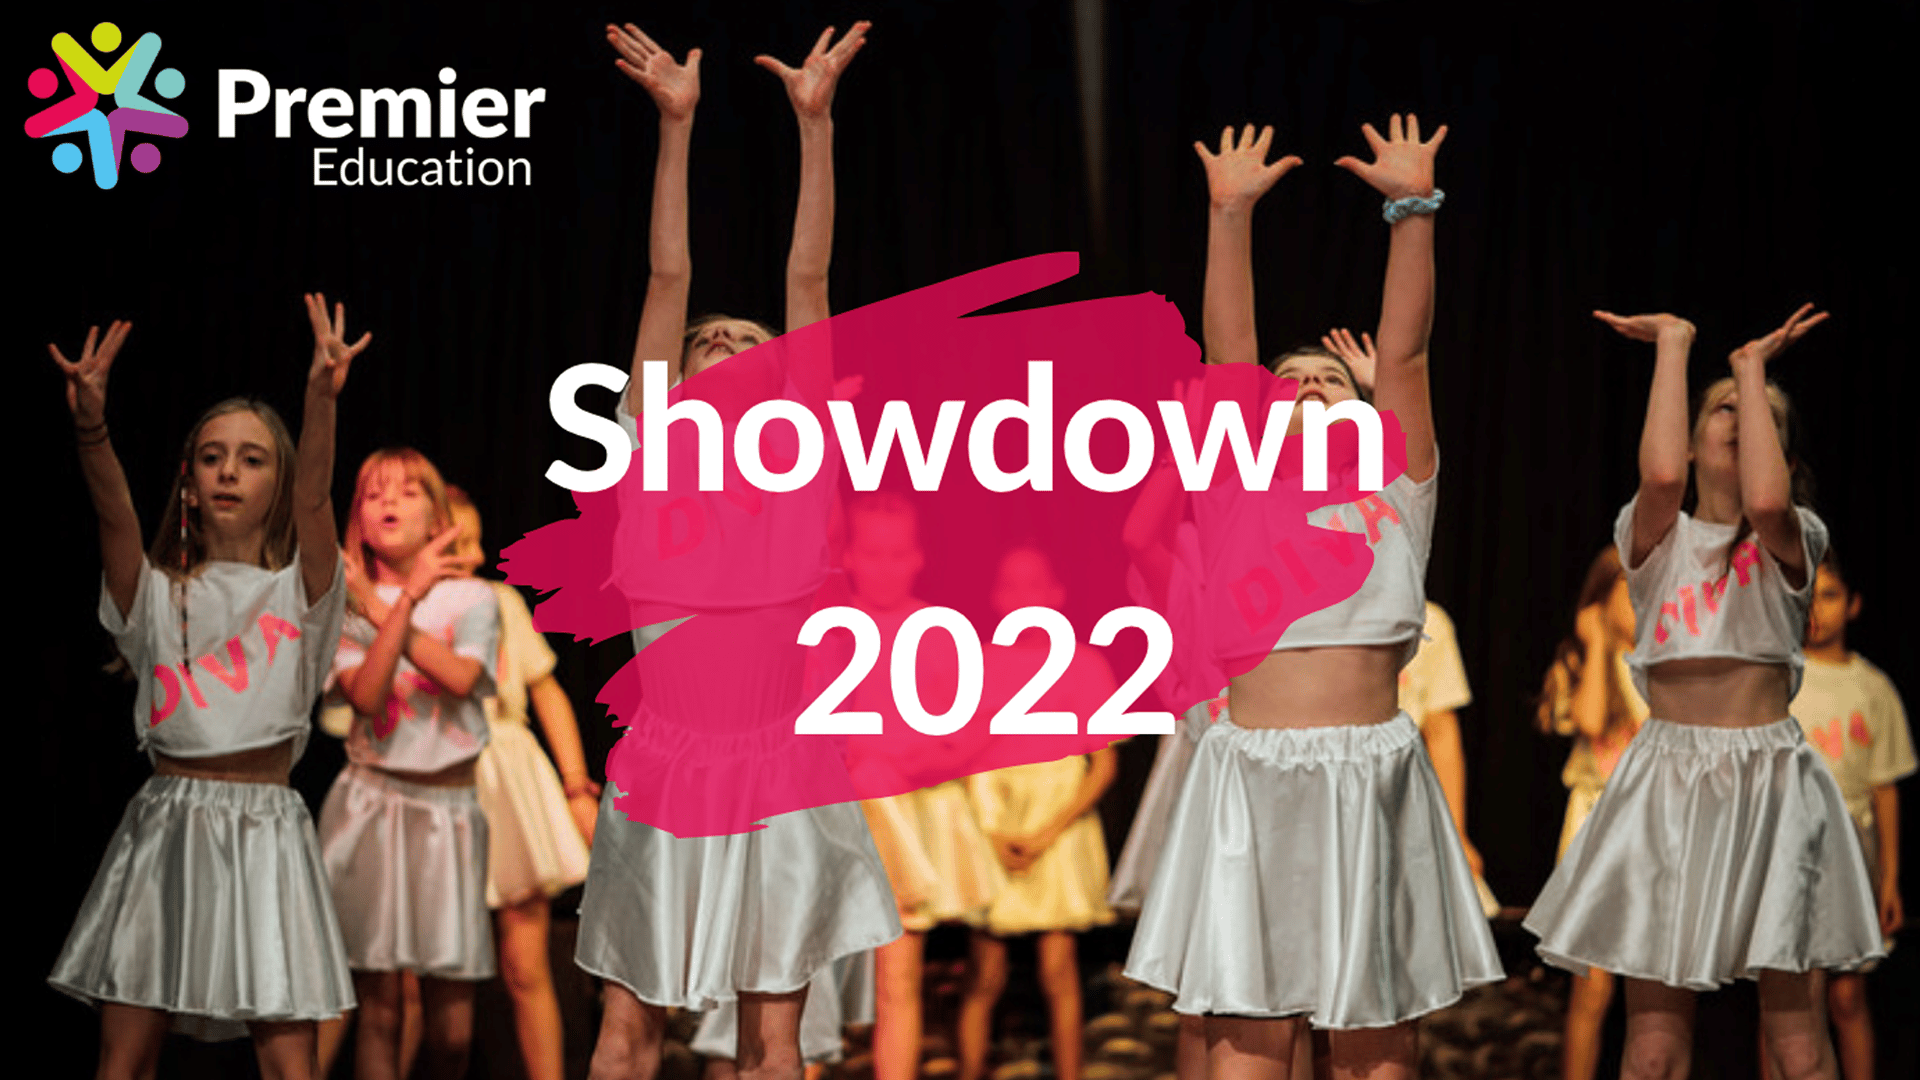 Children wearing white tops and white skirts holding their arms in the air as part of a dance routine. The picture is overlayed with a pink splodge with the words 'Showdown 2022' written over the top. The Premier Education logo is in the top left corner.